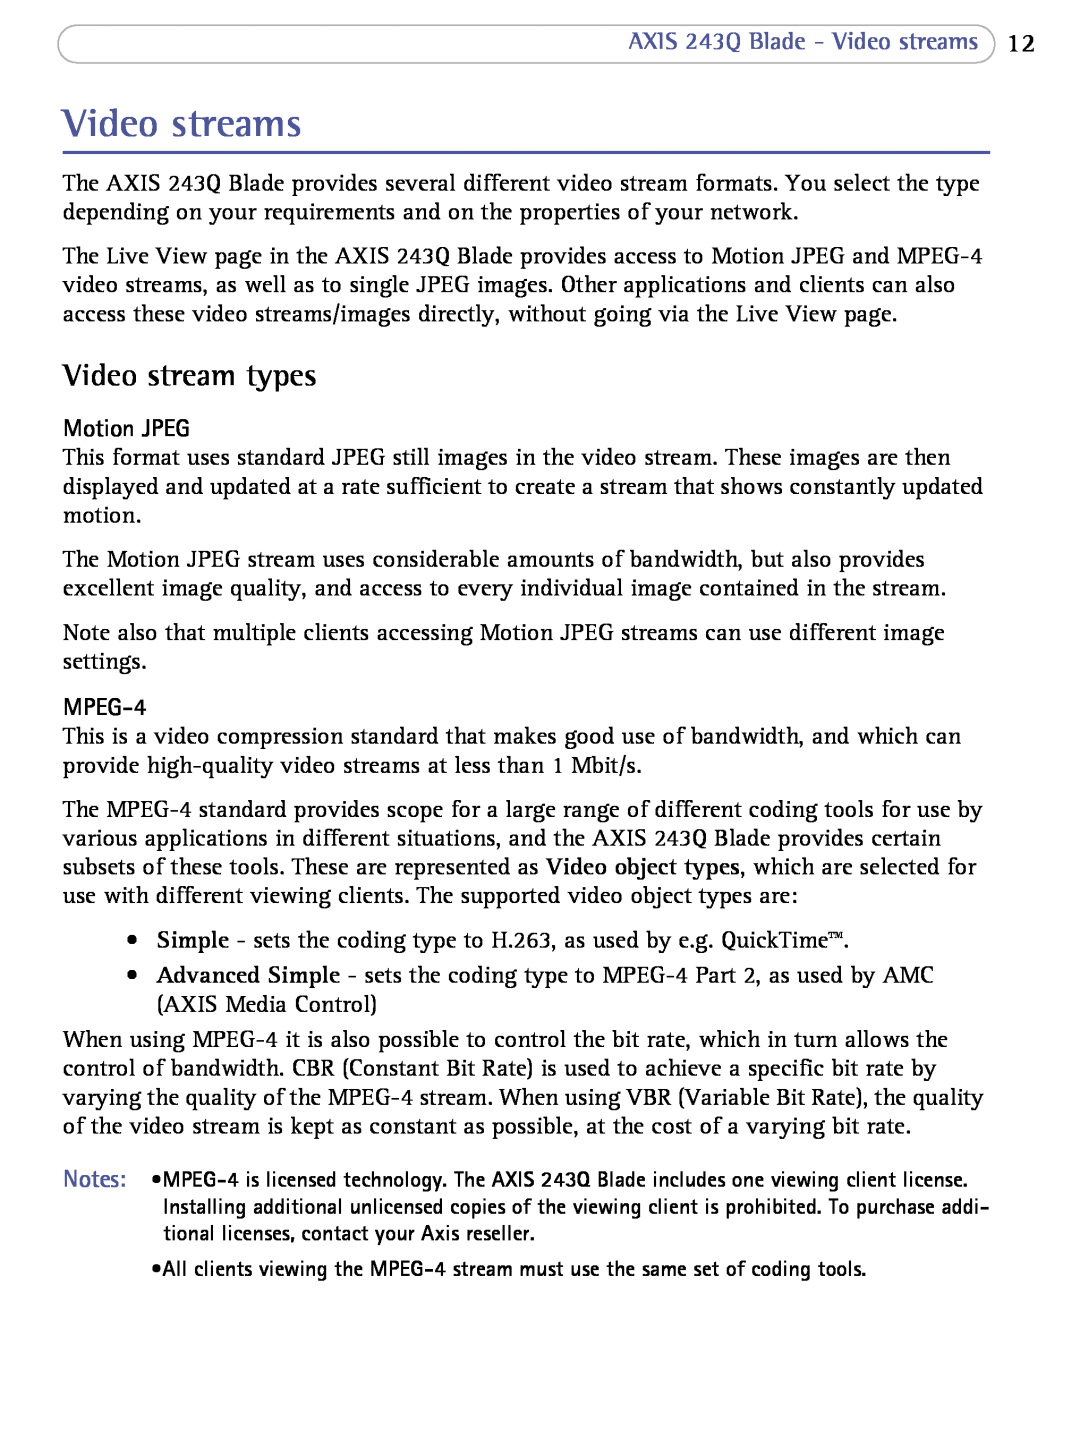 Axis Communications user manual Video stream types, AXIS 243Q Blade - Video streams 